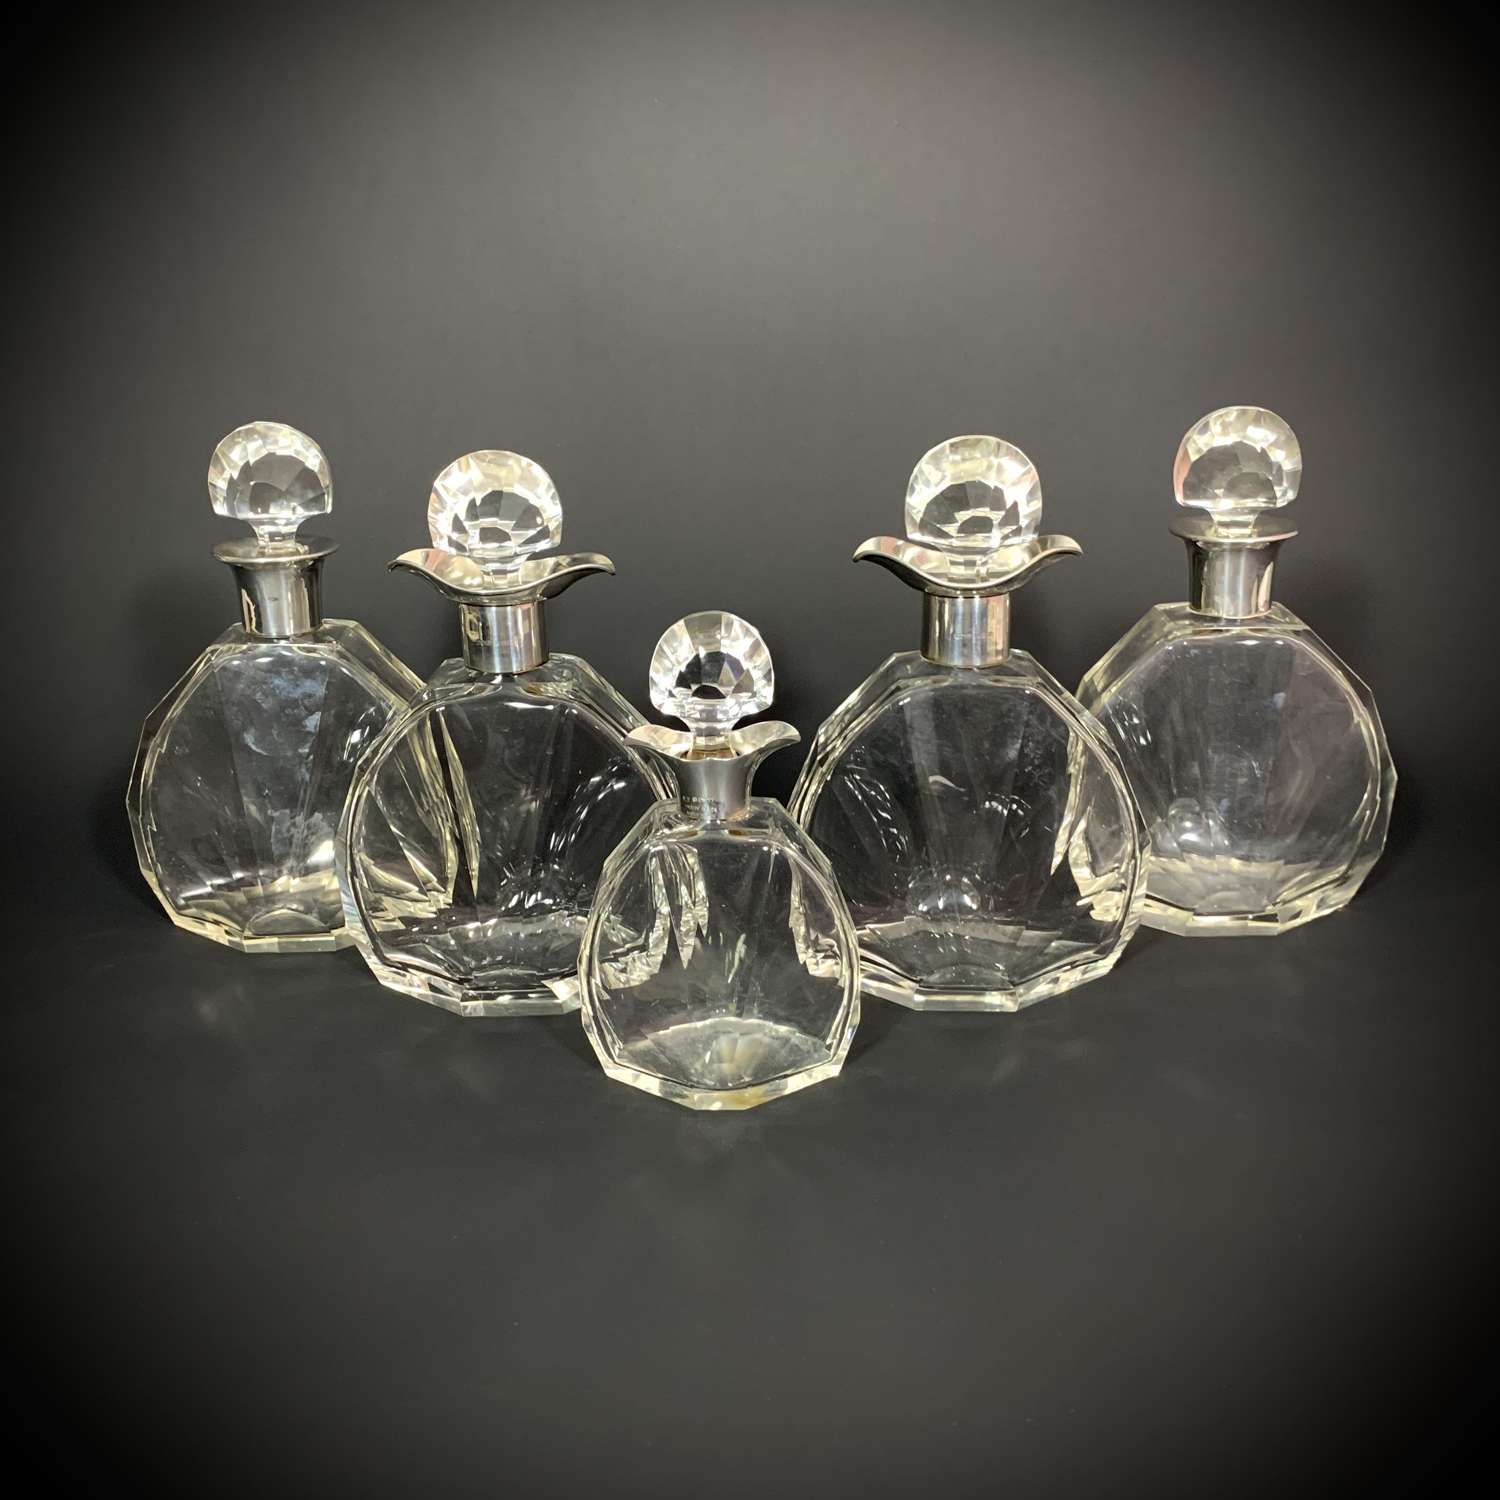 Matched set of 5 art Deco Decanters